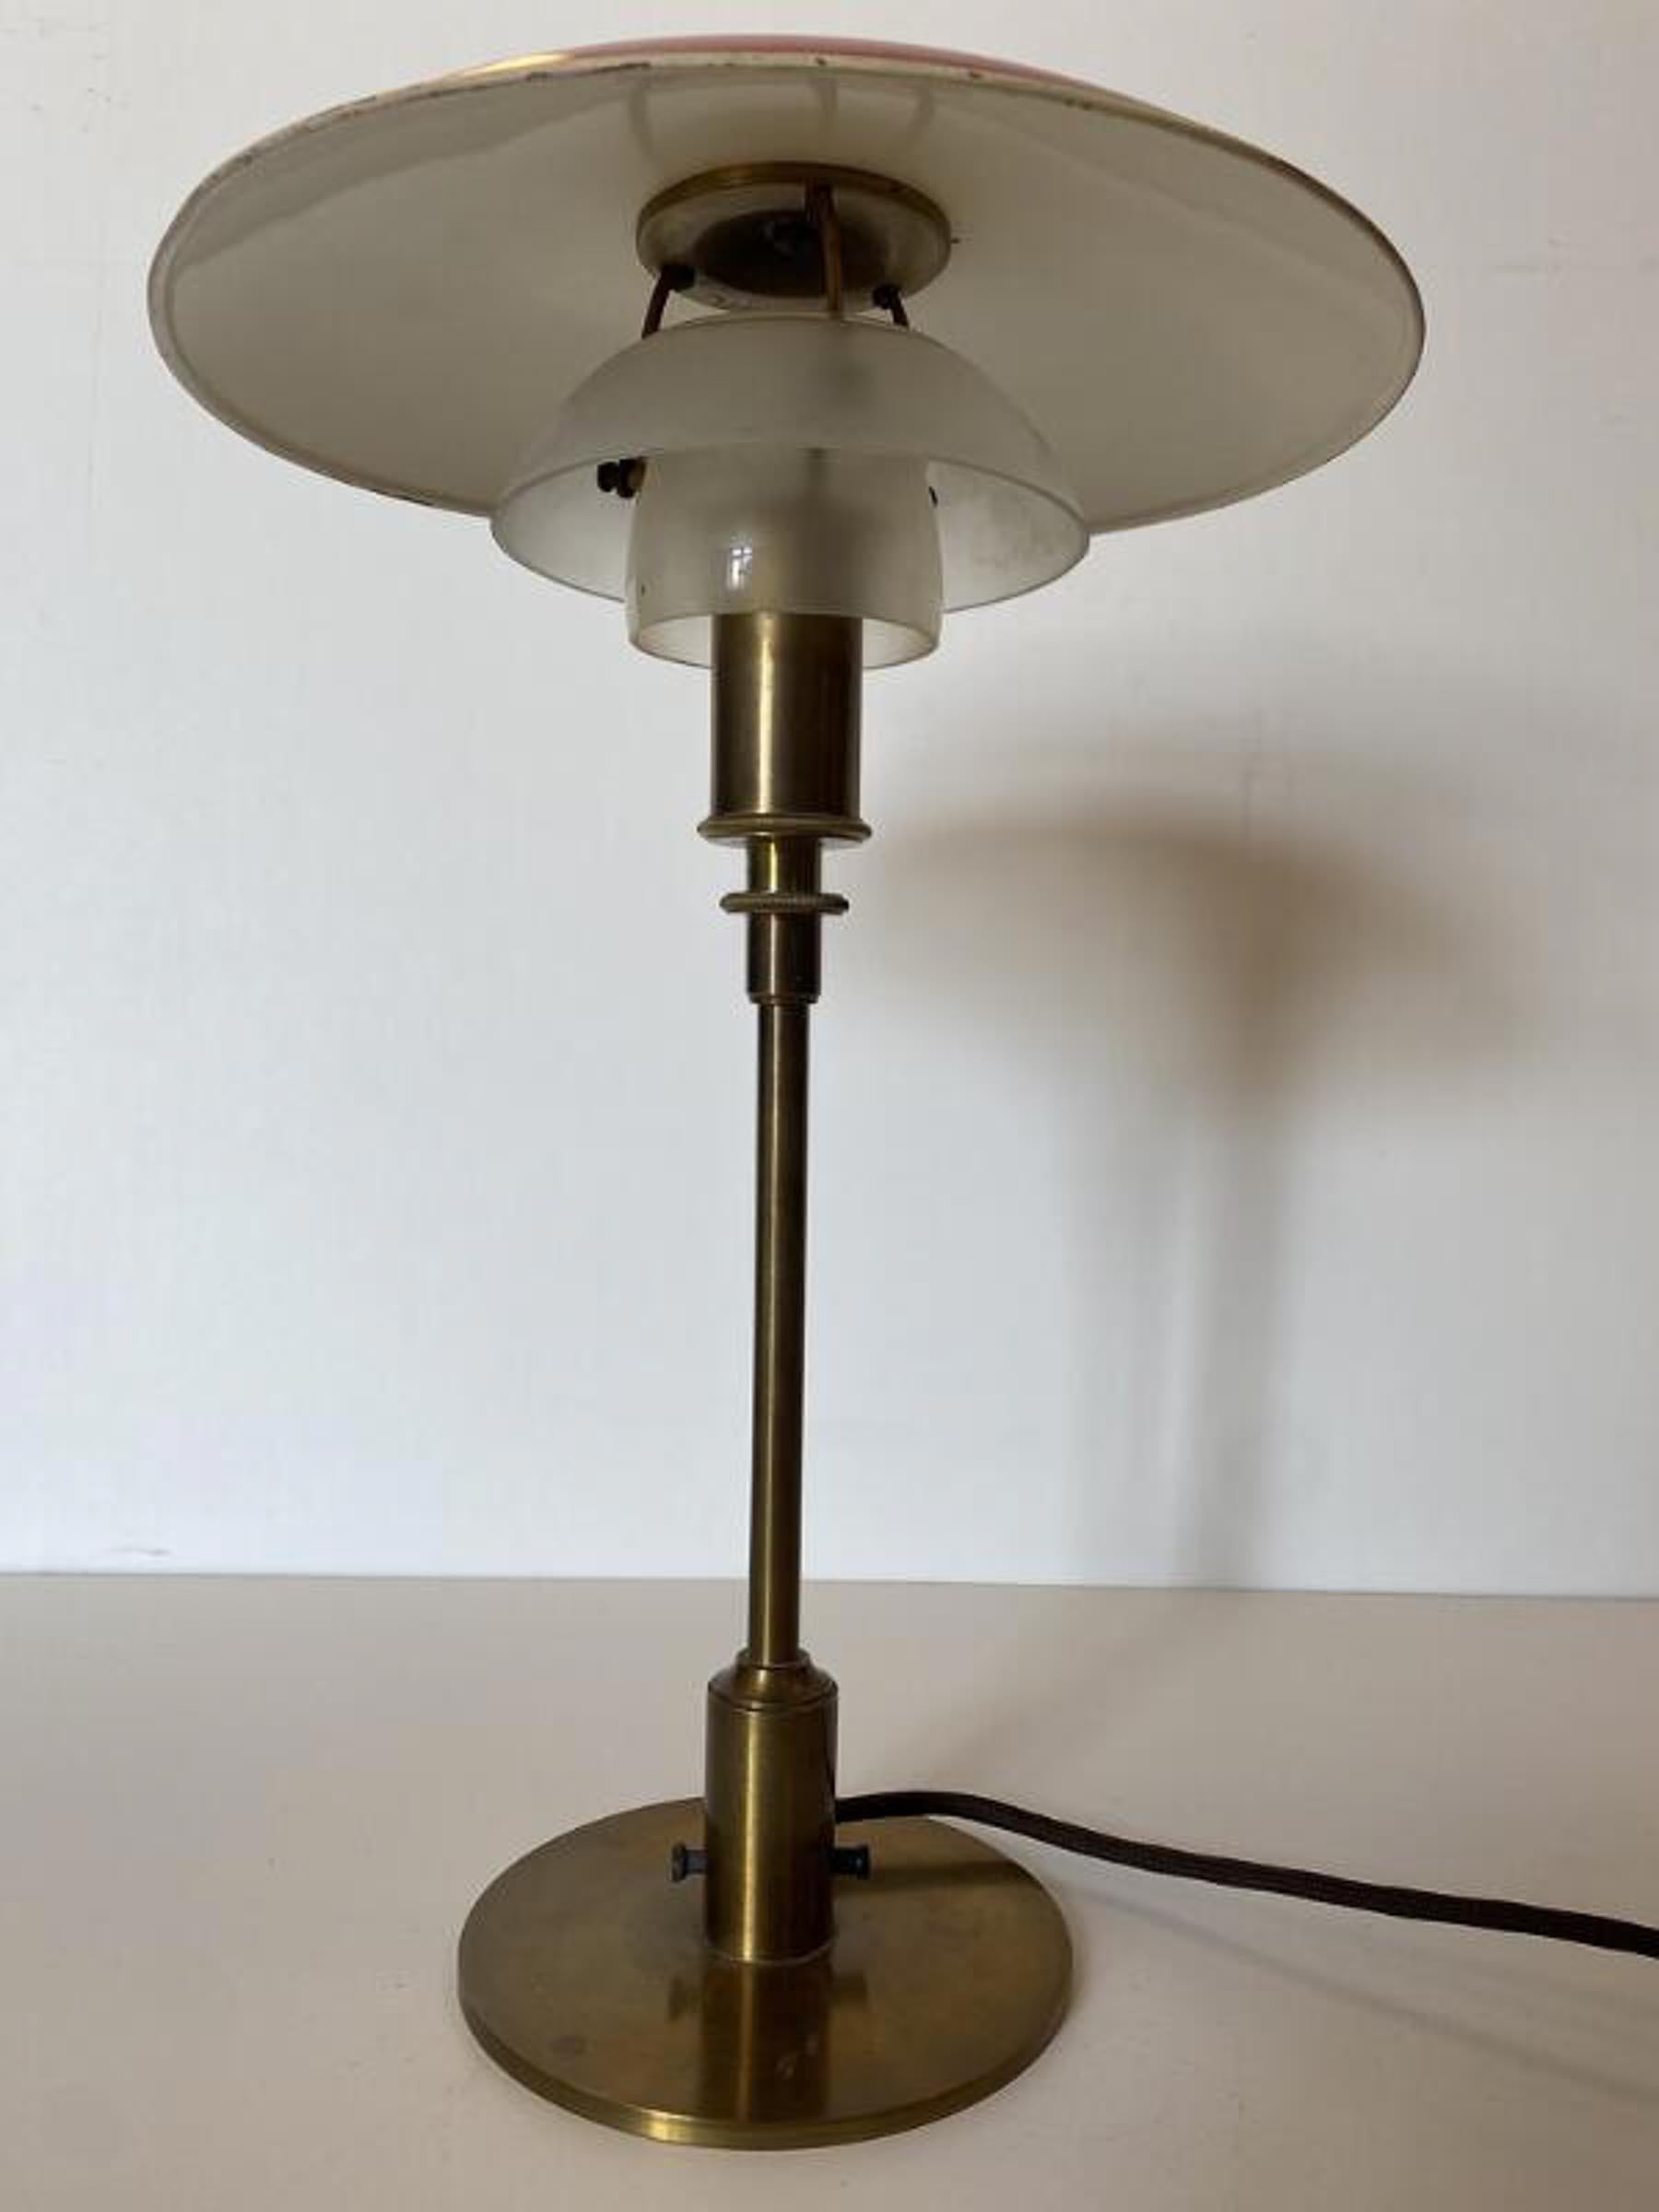 Early 20th Century Poul Henningsen 3/2 Table Lamp of Patinated Brass. Pat. Appl. 1926-1928, Denmark